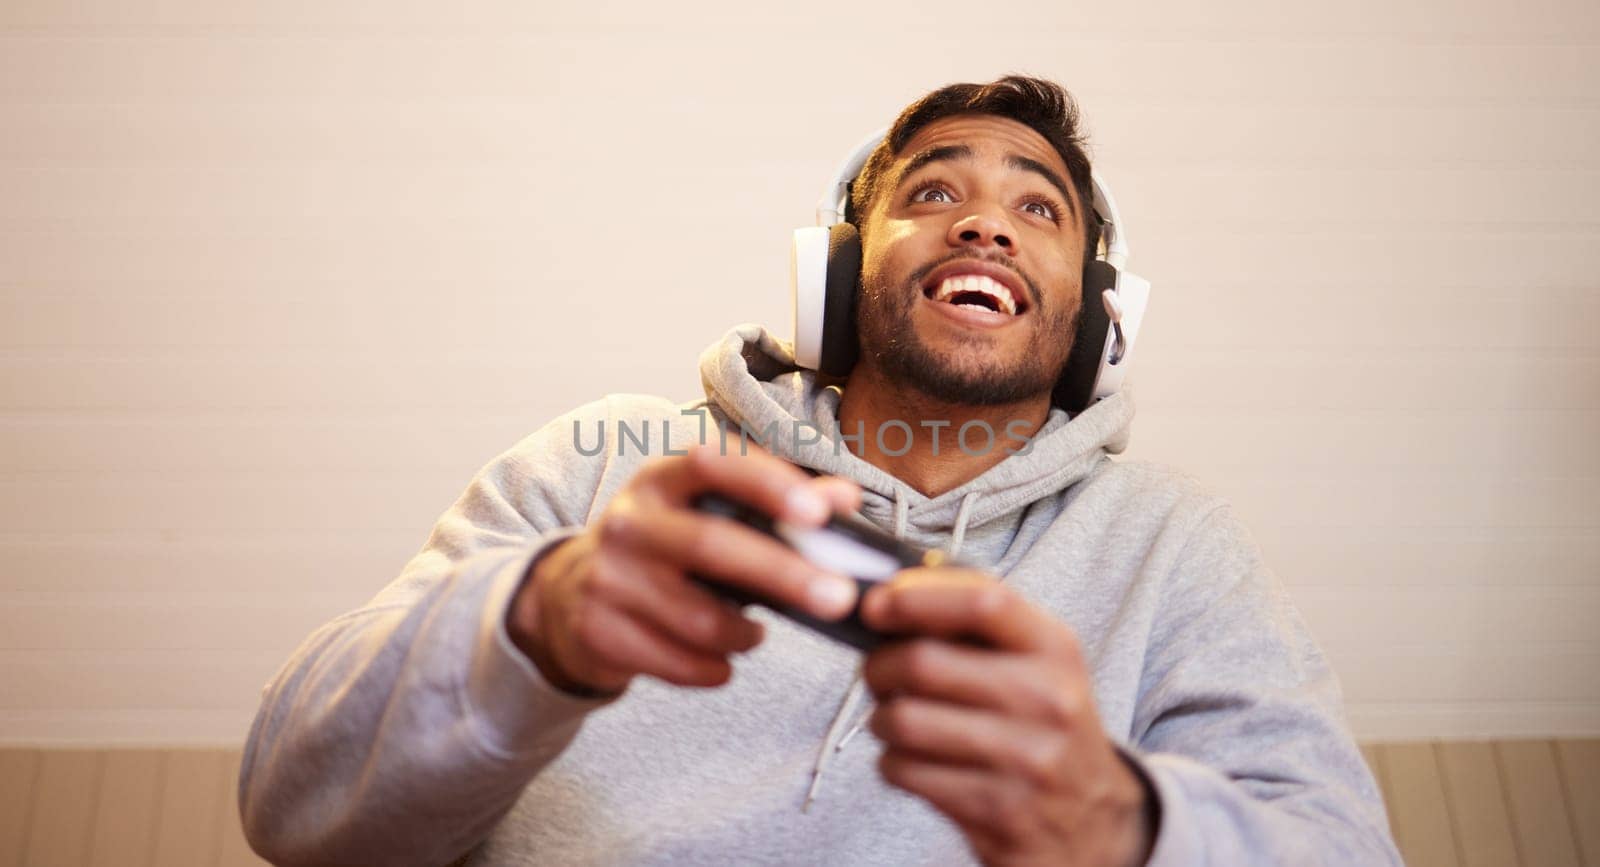 Man play video games, headphones and controller for esports, online streaming and happy at home. Male gamer, smile with entertainment and excited about gaming competition, tech and cyber streamer.